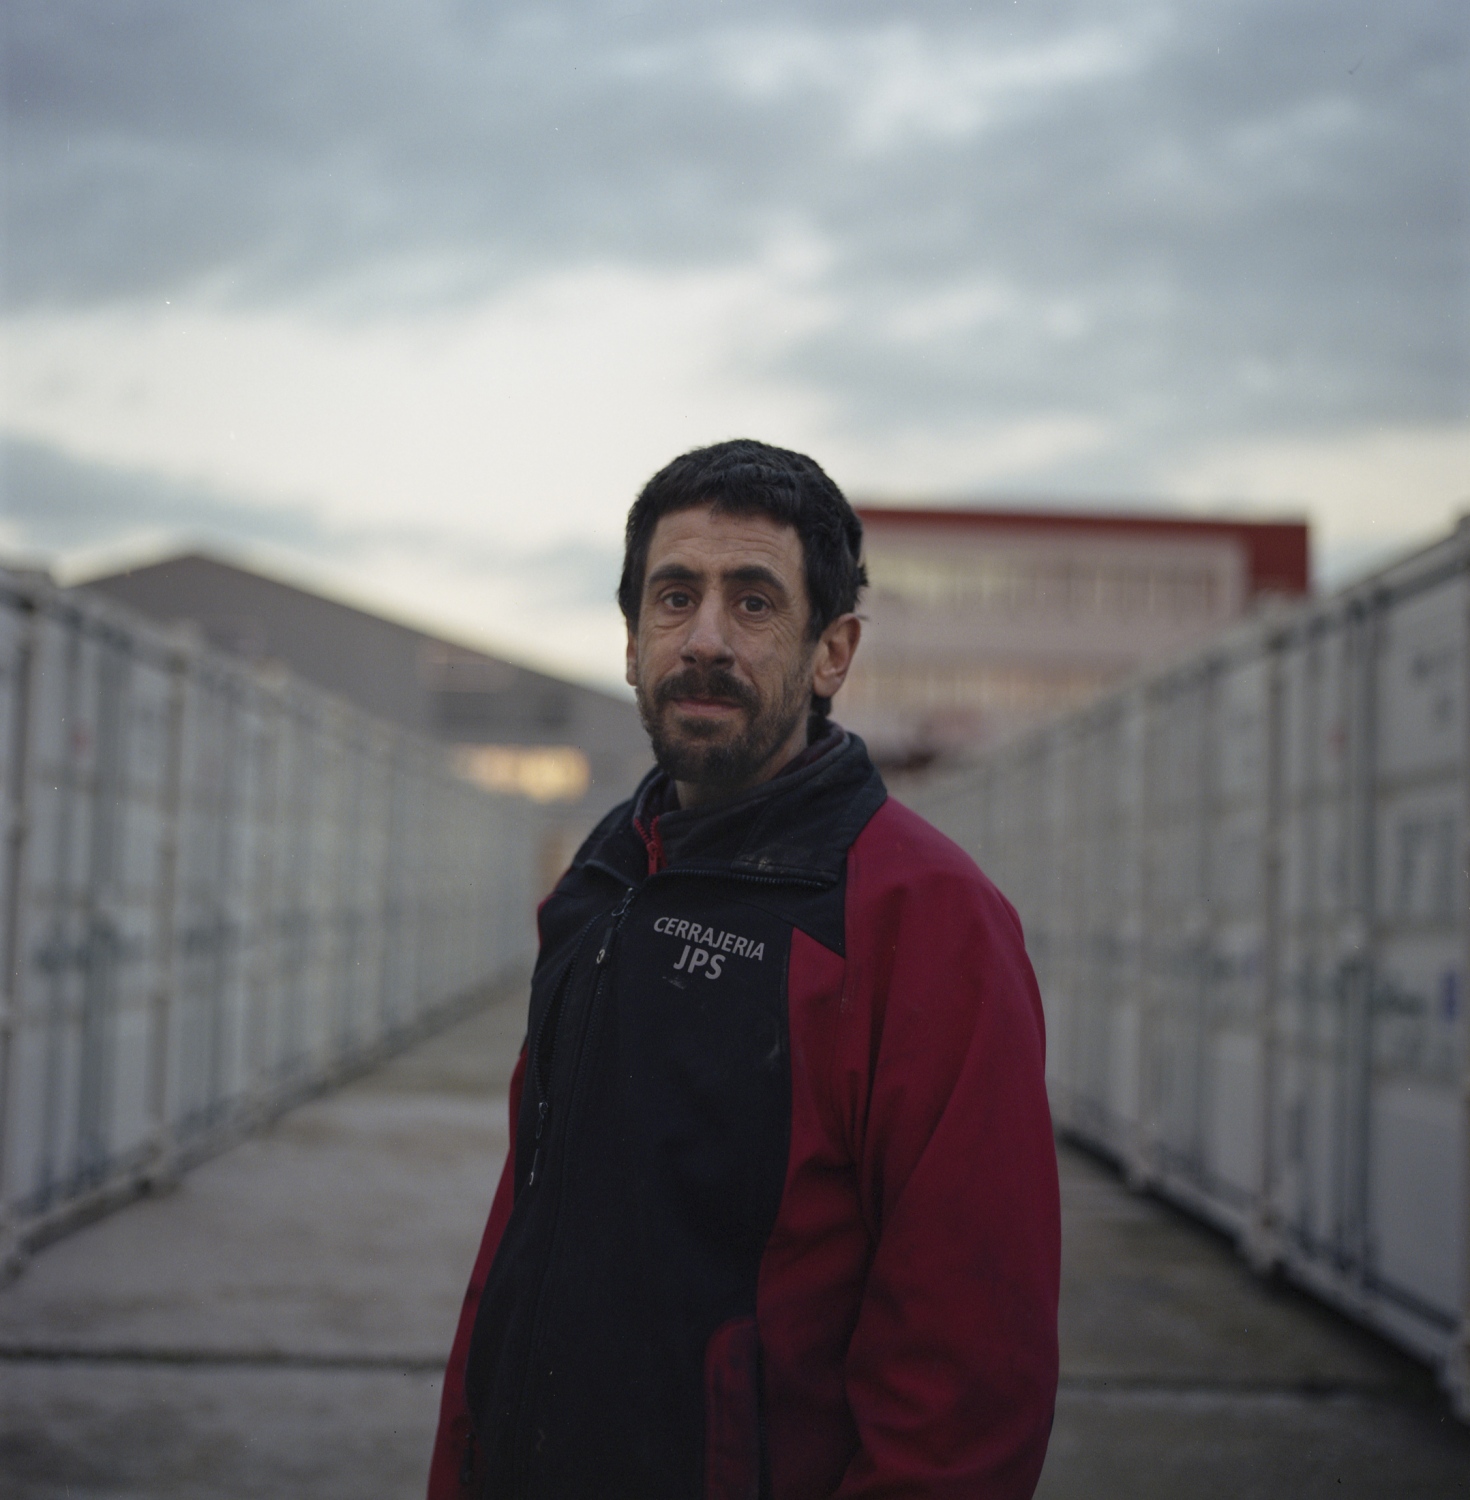 Jose poses for a portrait in a shipping container yard he manages the security for. Speaking of...